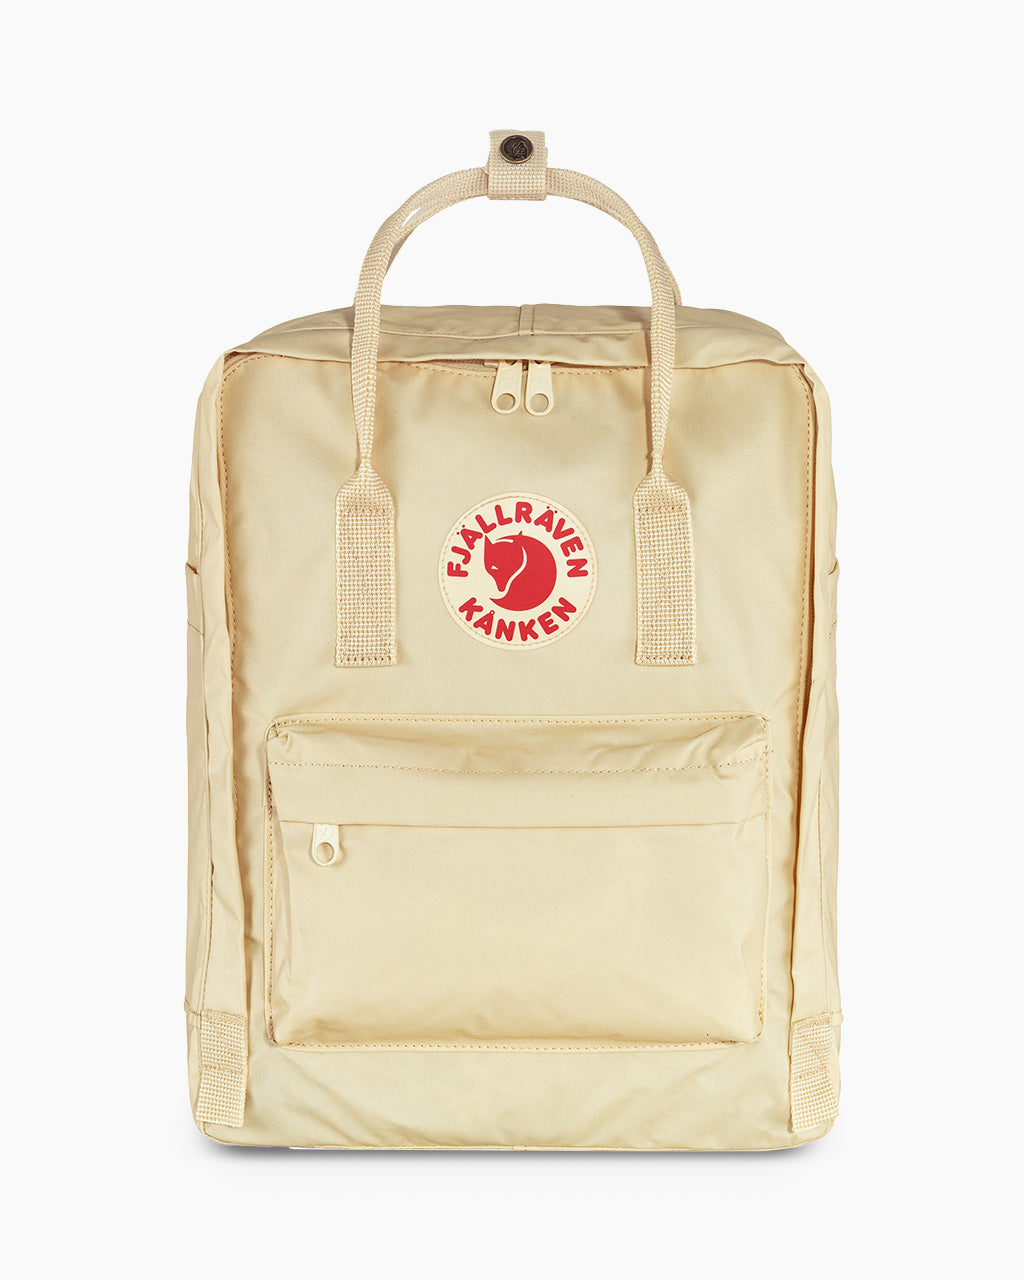 Get A Classic Swedish Backpack Design, Now Made With Recycled Water Bo